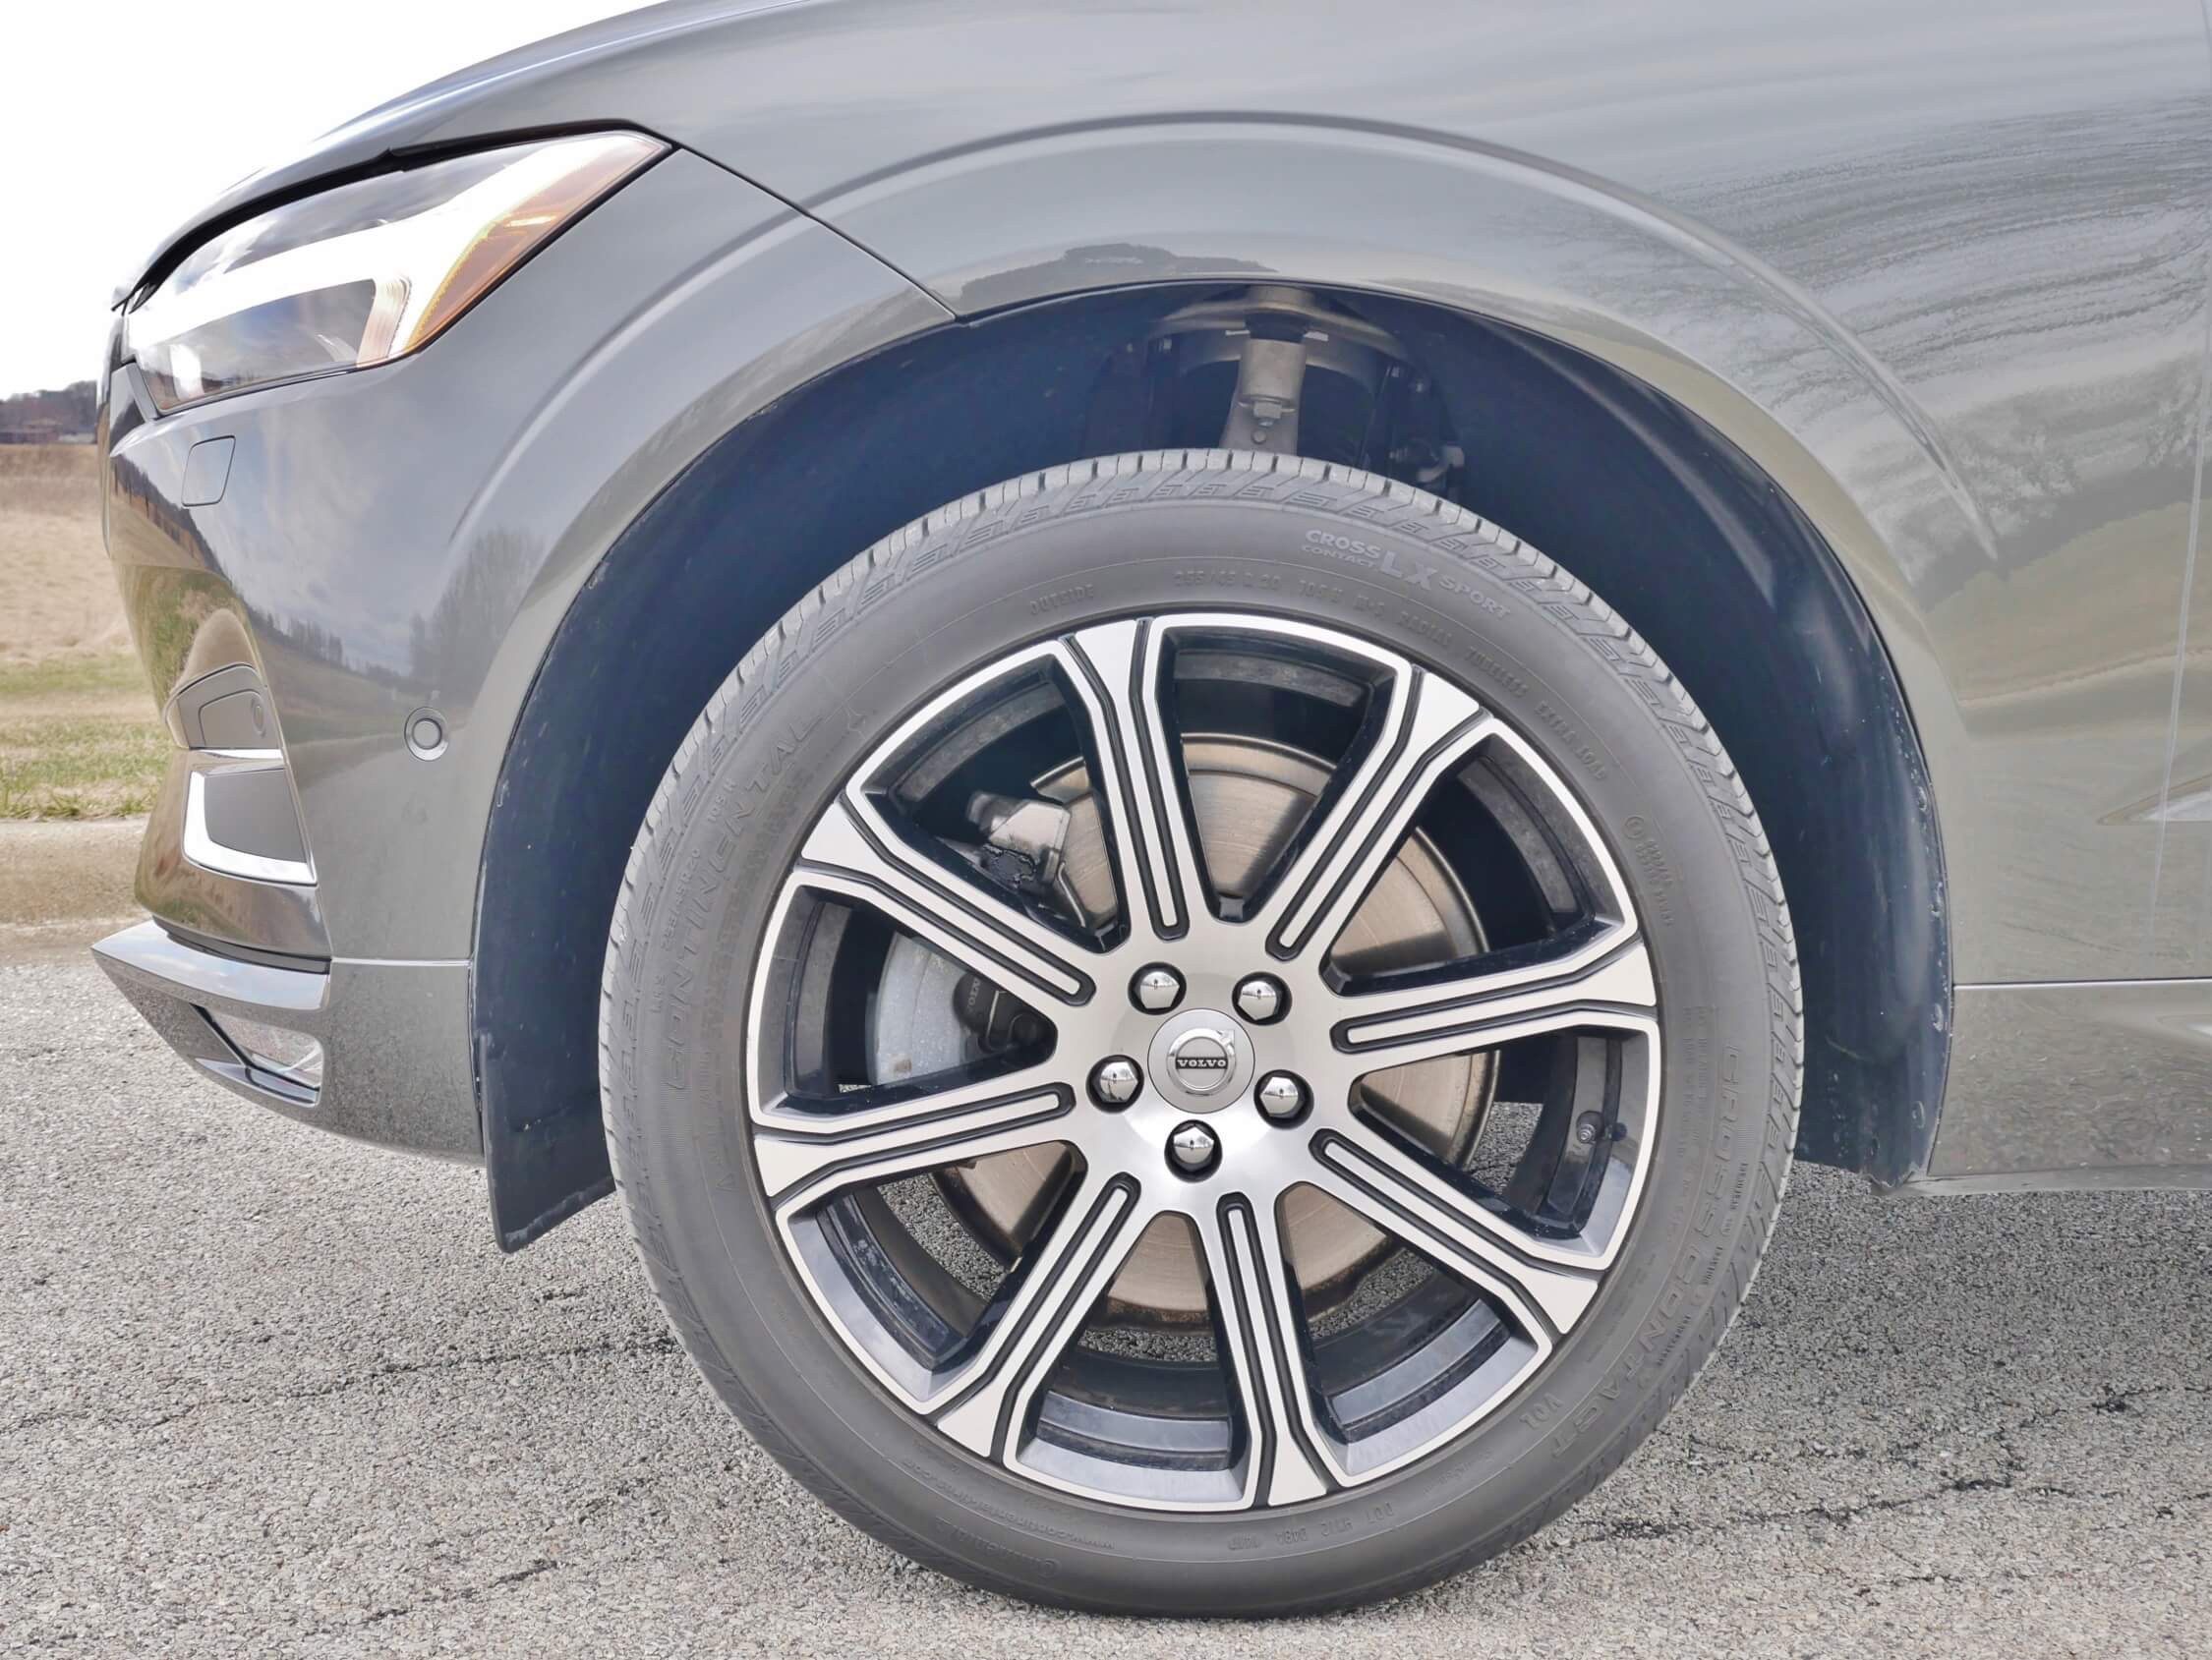 2018 Volvo XC60 T6 AWD Inscription: Optional Air Springs needed to absorb 20" alloy impacts and impart plaint roll resistance. Hefty steering suffers from vagueness at speed. Good initial friction frustrated by hard pedal at end of travel.